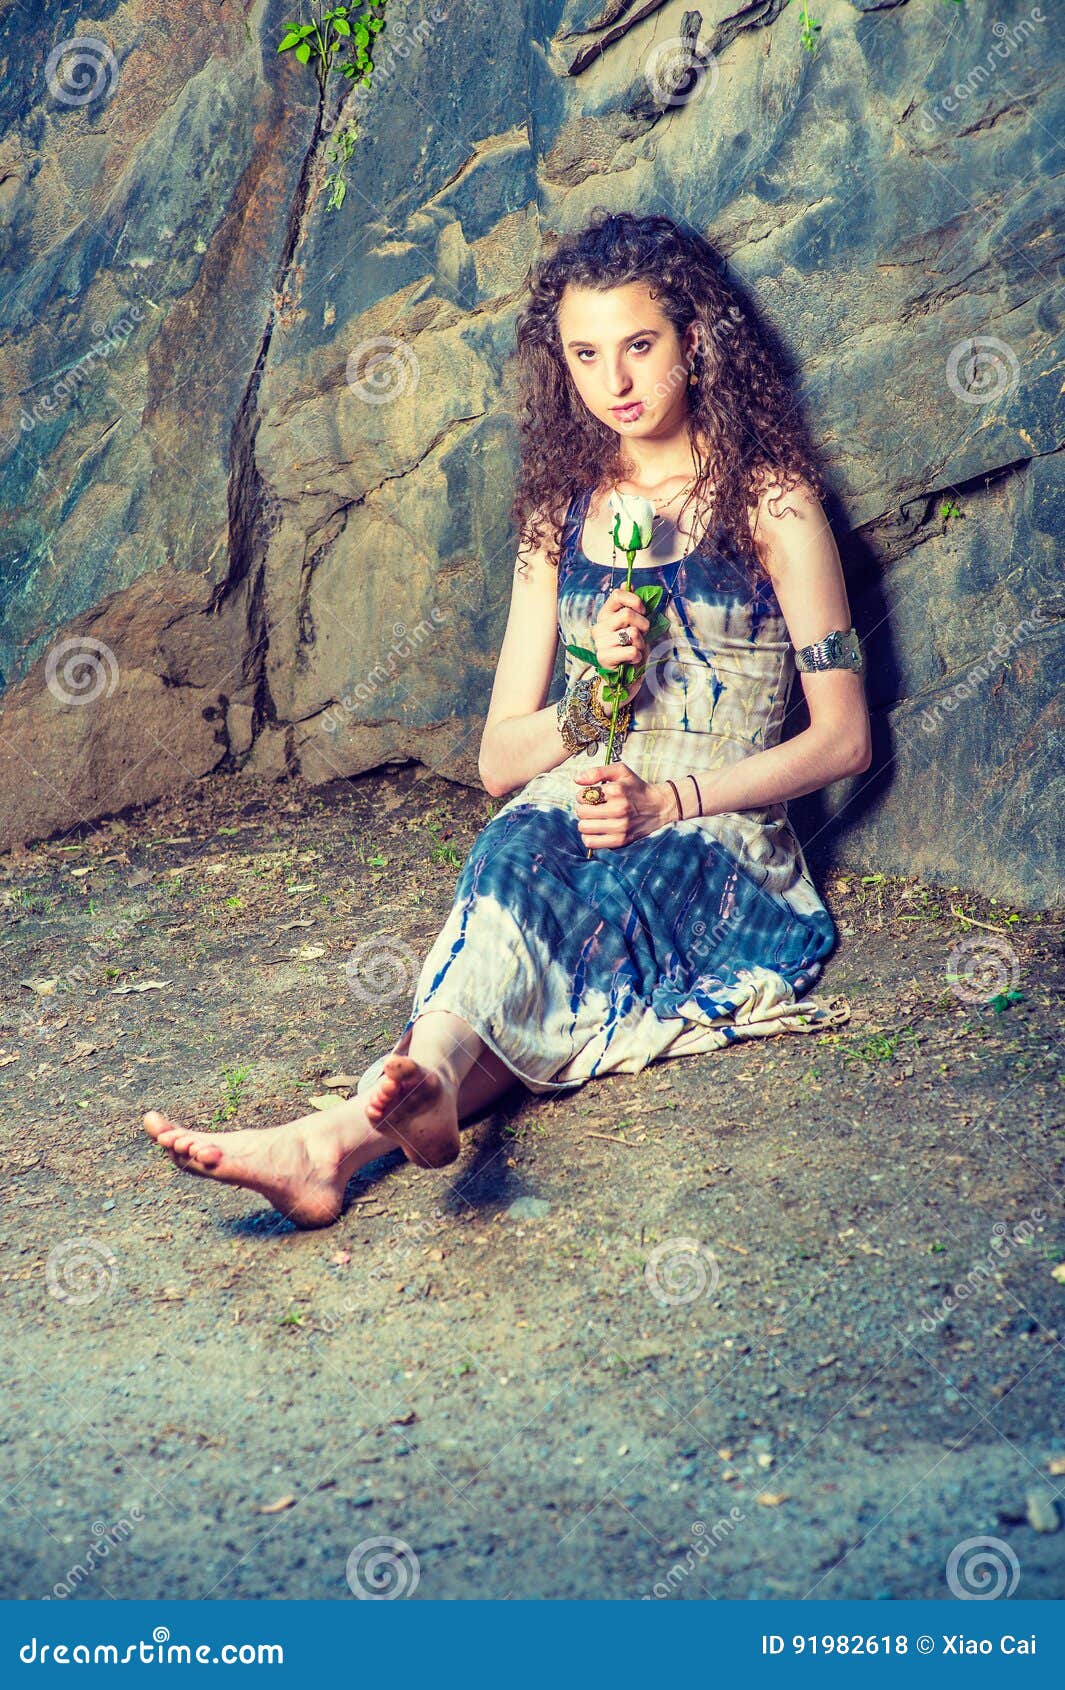 https://thumbs.dreamstime.com/z/young-american-woman-missing-you-white-rose-new-york-waiting-teenage-girl-curly-long-hair-wearing-patterned-long-dress-91982618.jpg